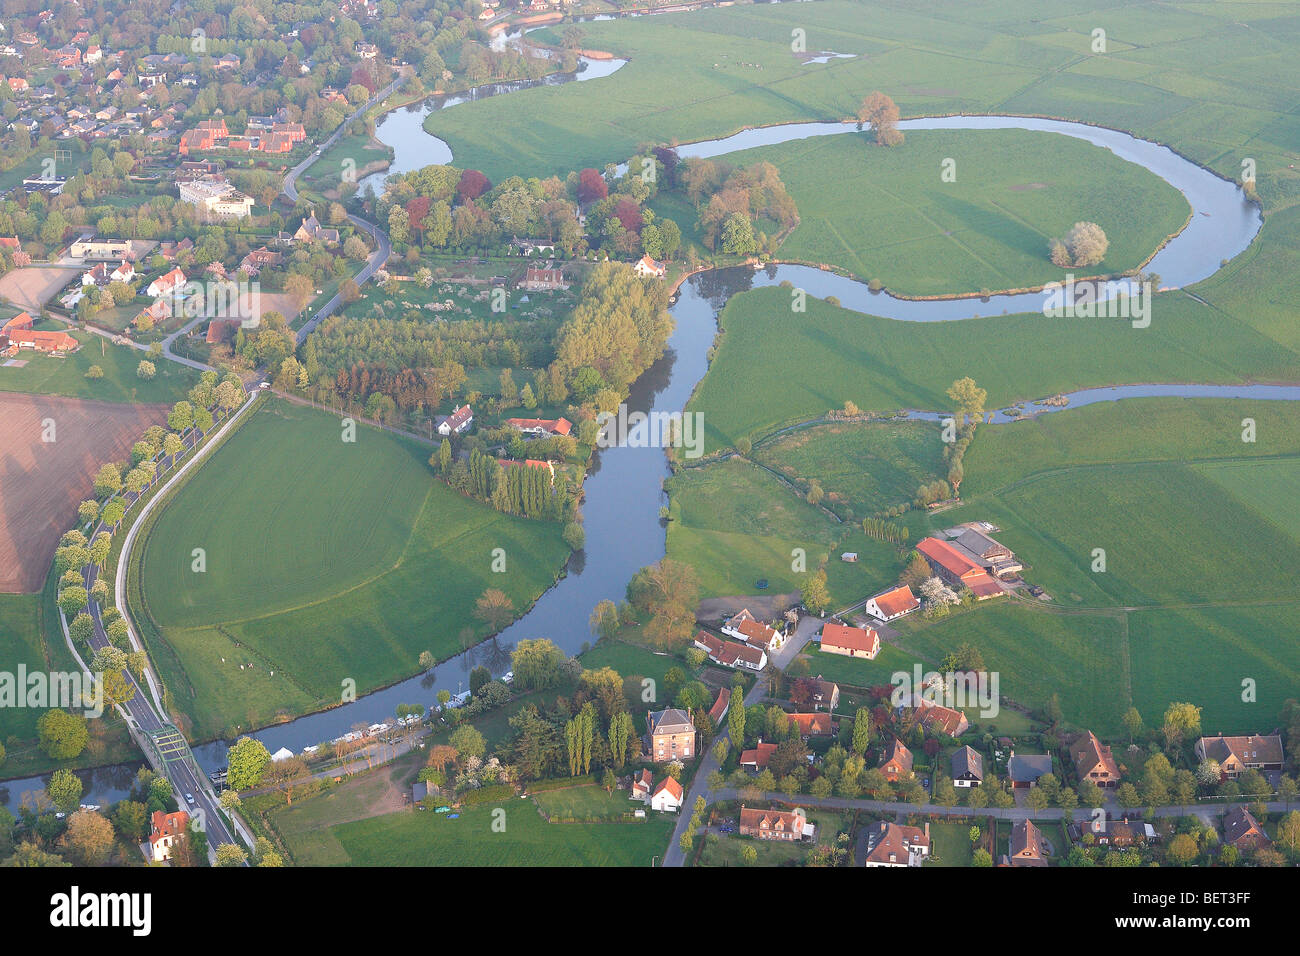 Old meander, grasslands, urbanisation and forested area along river Leie, valley of Leie, Belgium Stock Photo